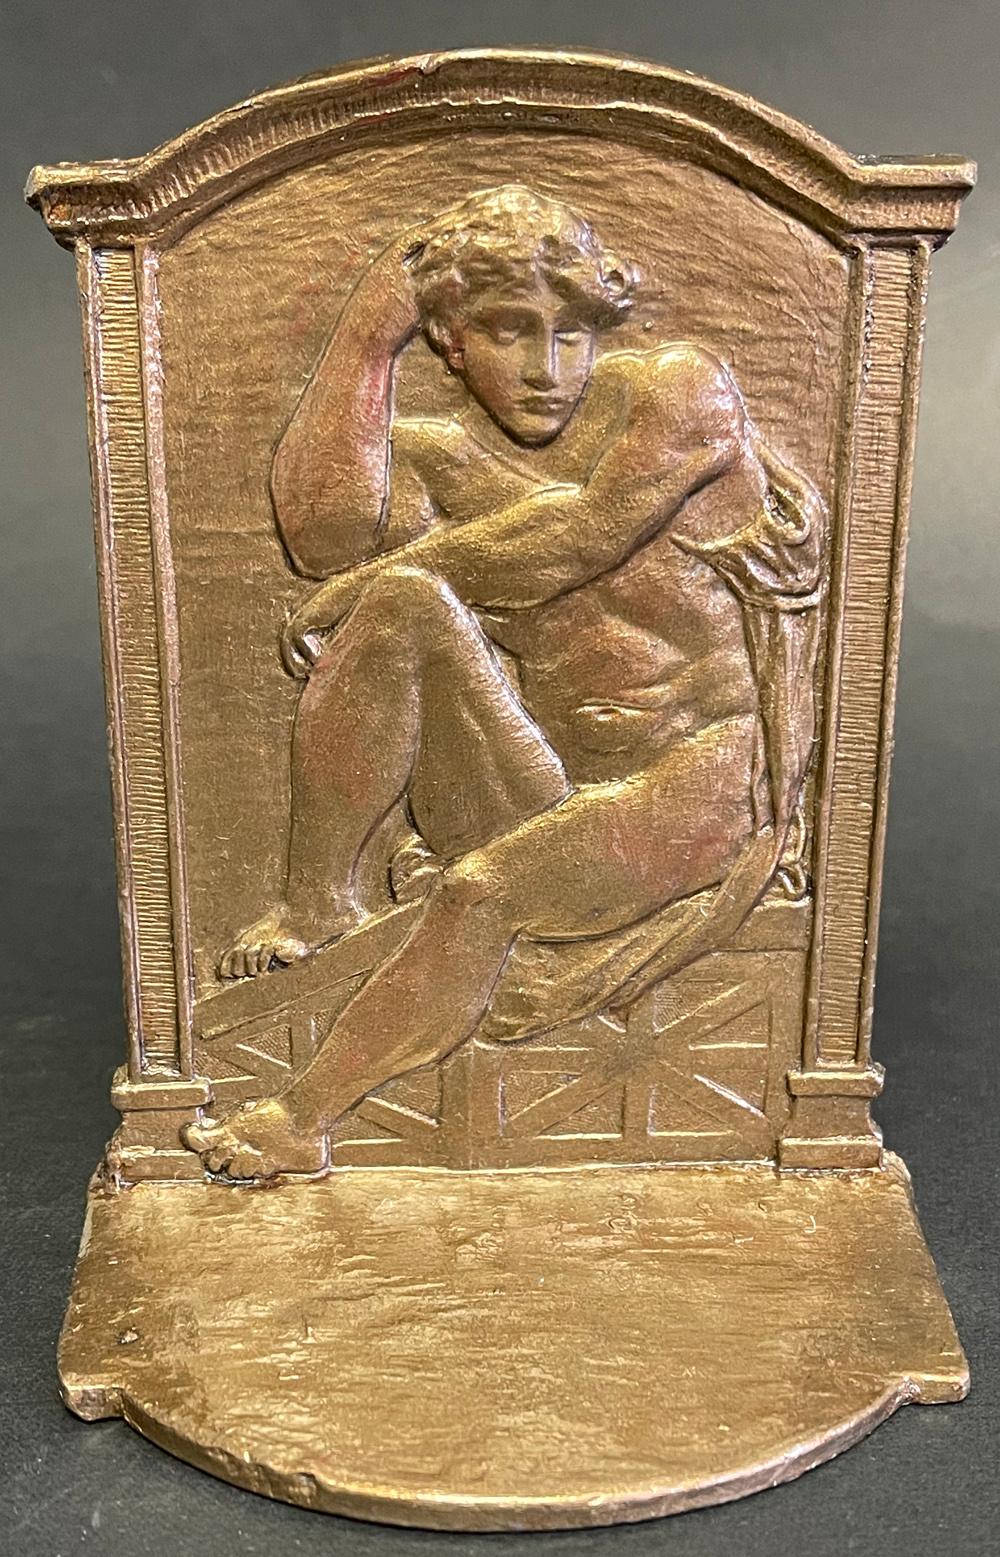 Rare and very fine, this set of bronze-toned bookends feature a nude male figure in repose, his arms resting on one knee, in a Renaissance setting topped with an arched cornice and pilasters to either side. The bas relief is very beautiful, and the